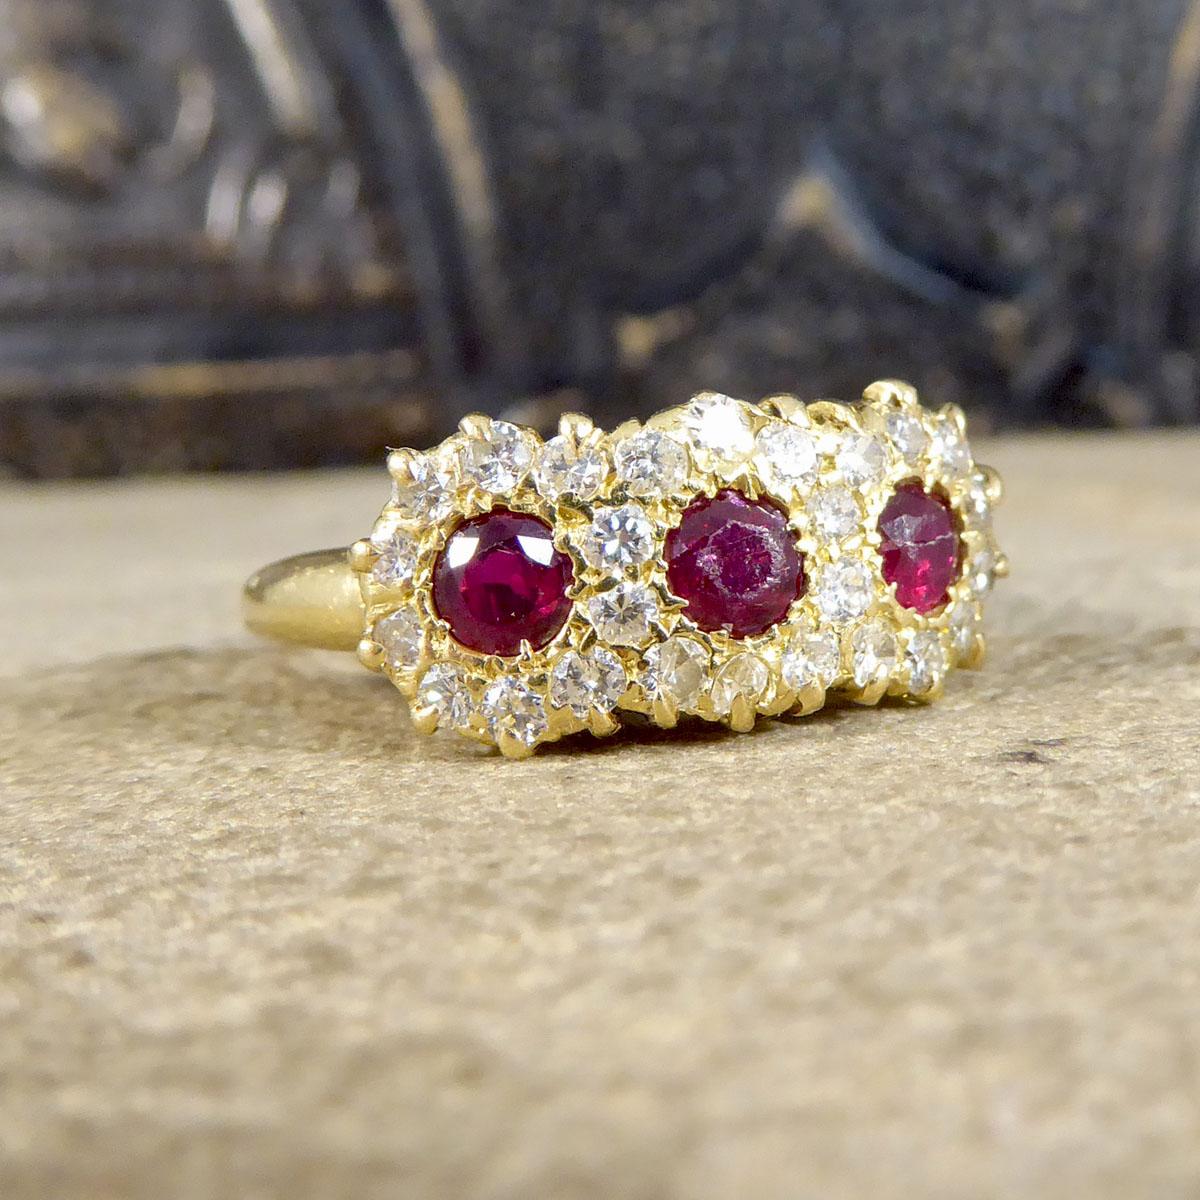 Such a beautiful antique ring that has been hand crafted in the Late Victorian era. This ring is created as a triple cluster featuring three round cut Rubies surrounded by cluster of Diamonds all in a claw setting. The wear on this ring and stones